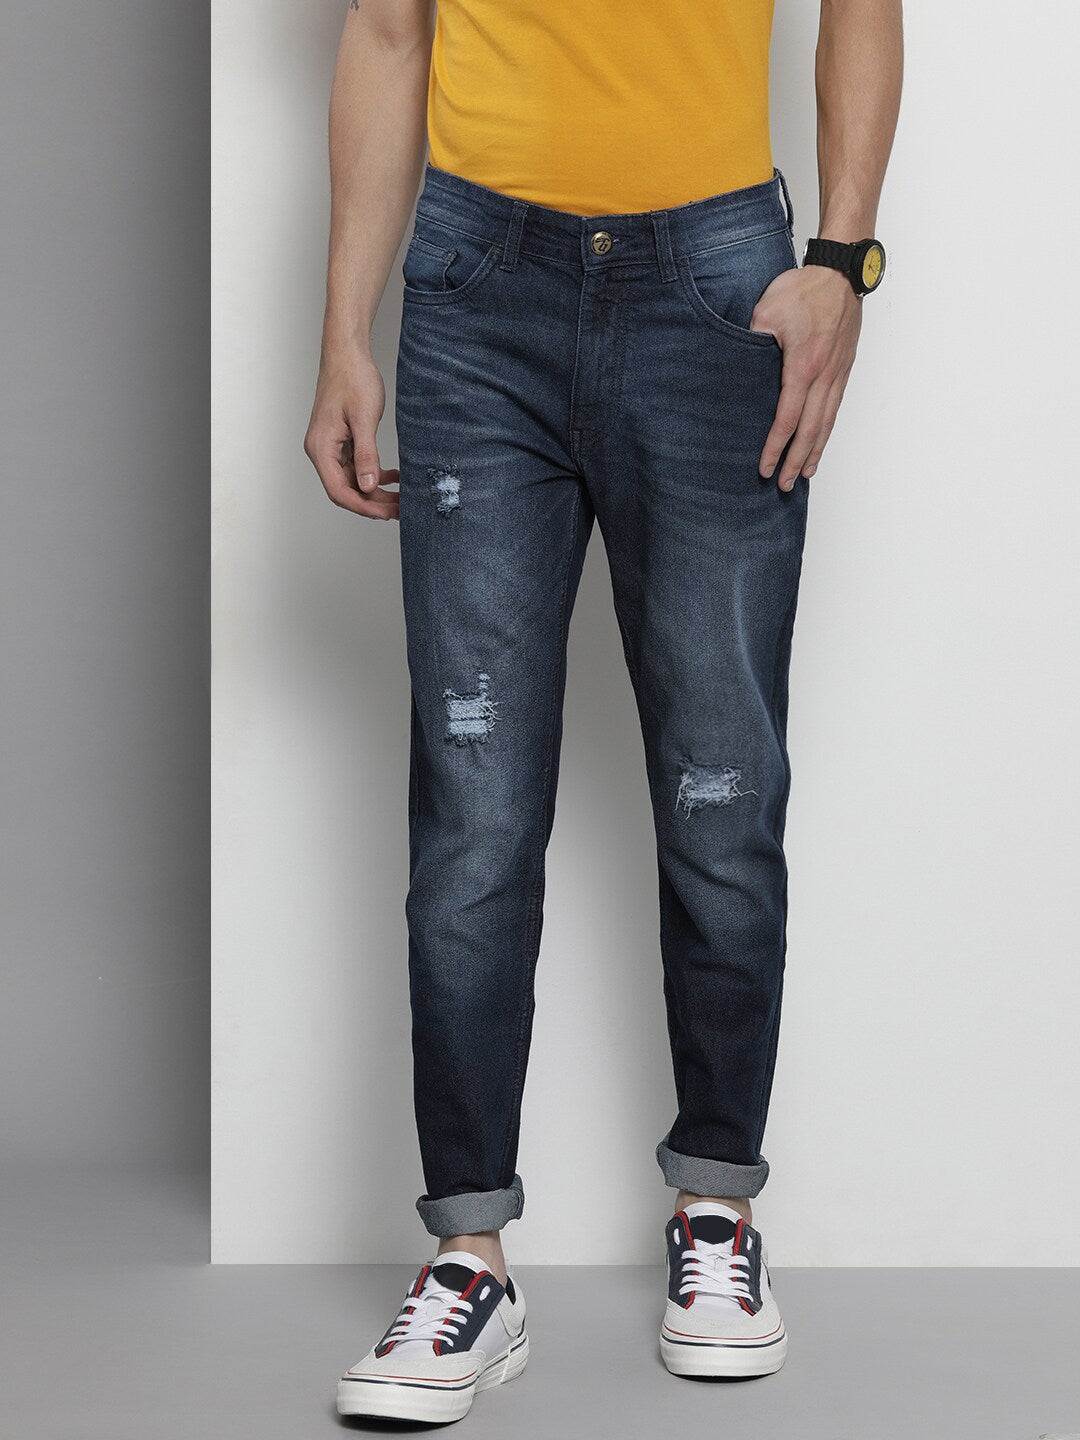 Blue Solid Jeans - 32 Blue